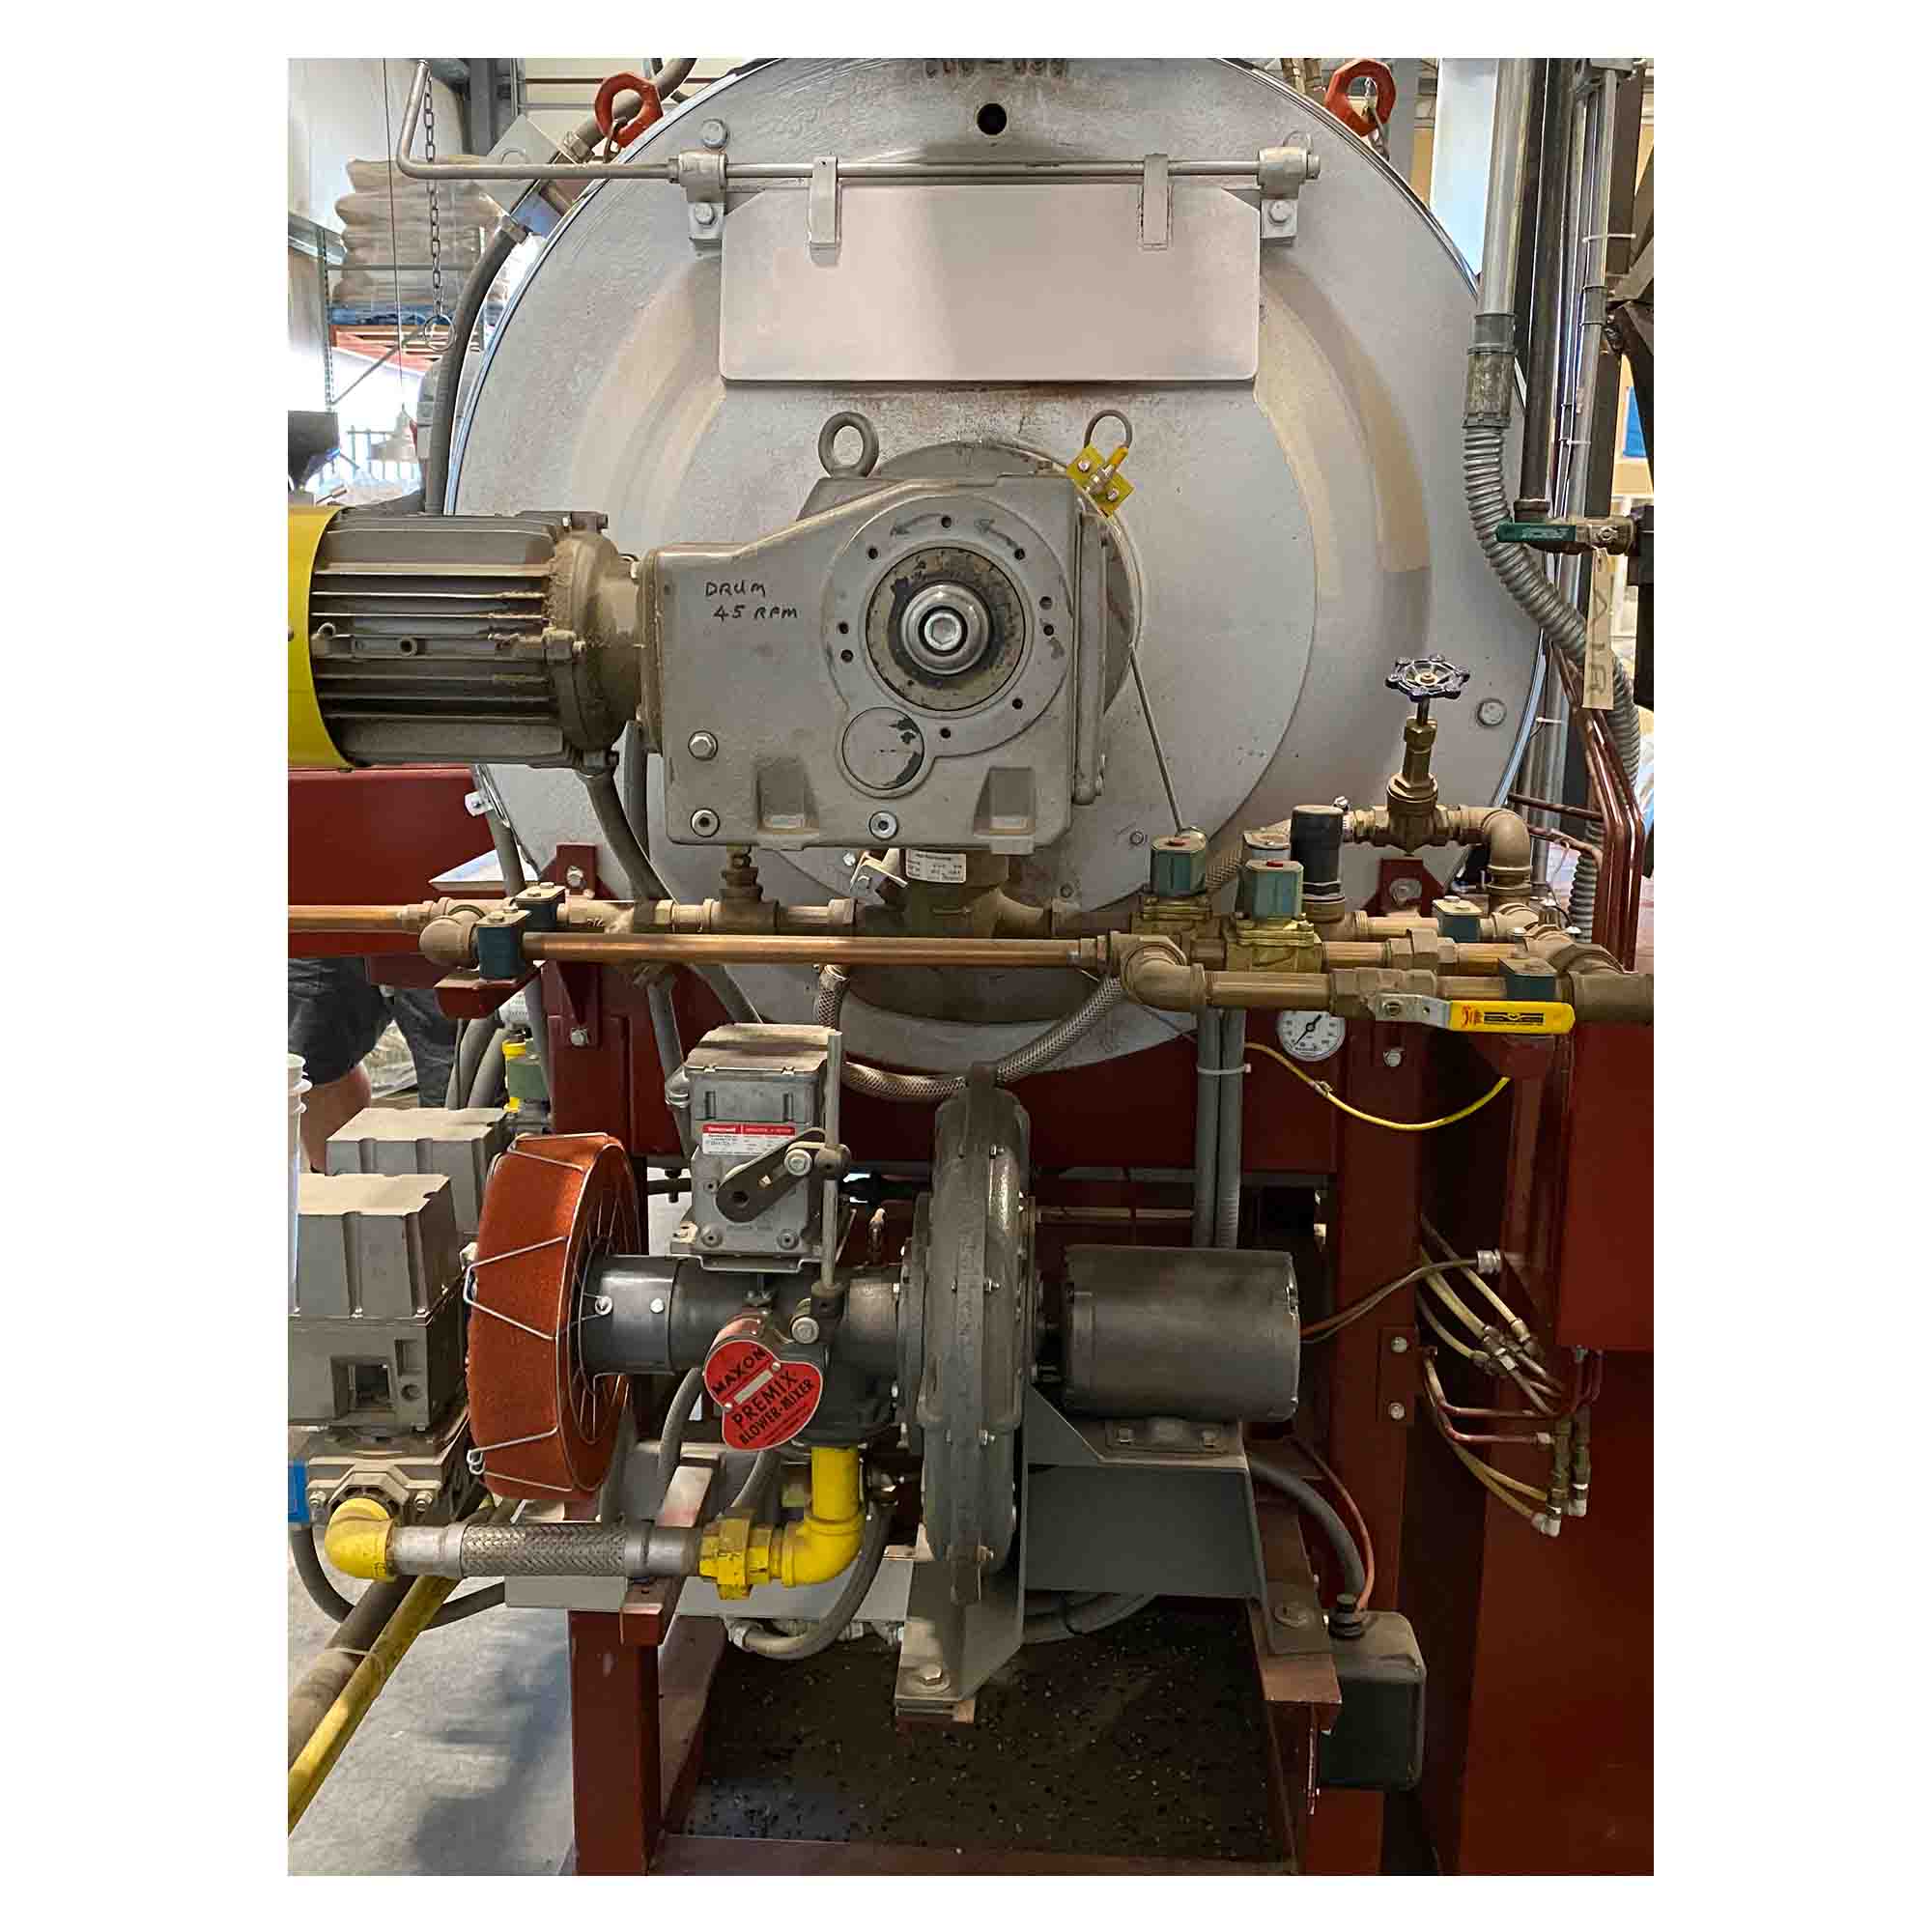 60kg Probat G60 Used Coffee Roaster and Mini-Plant — Incredible Condition - 2002